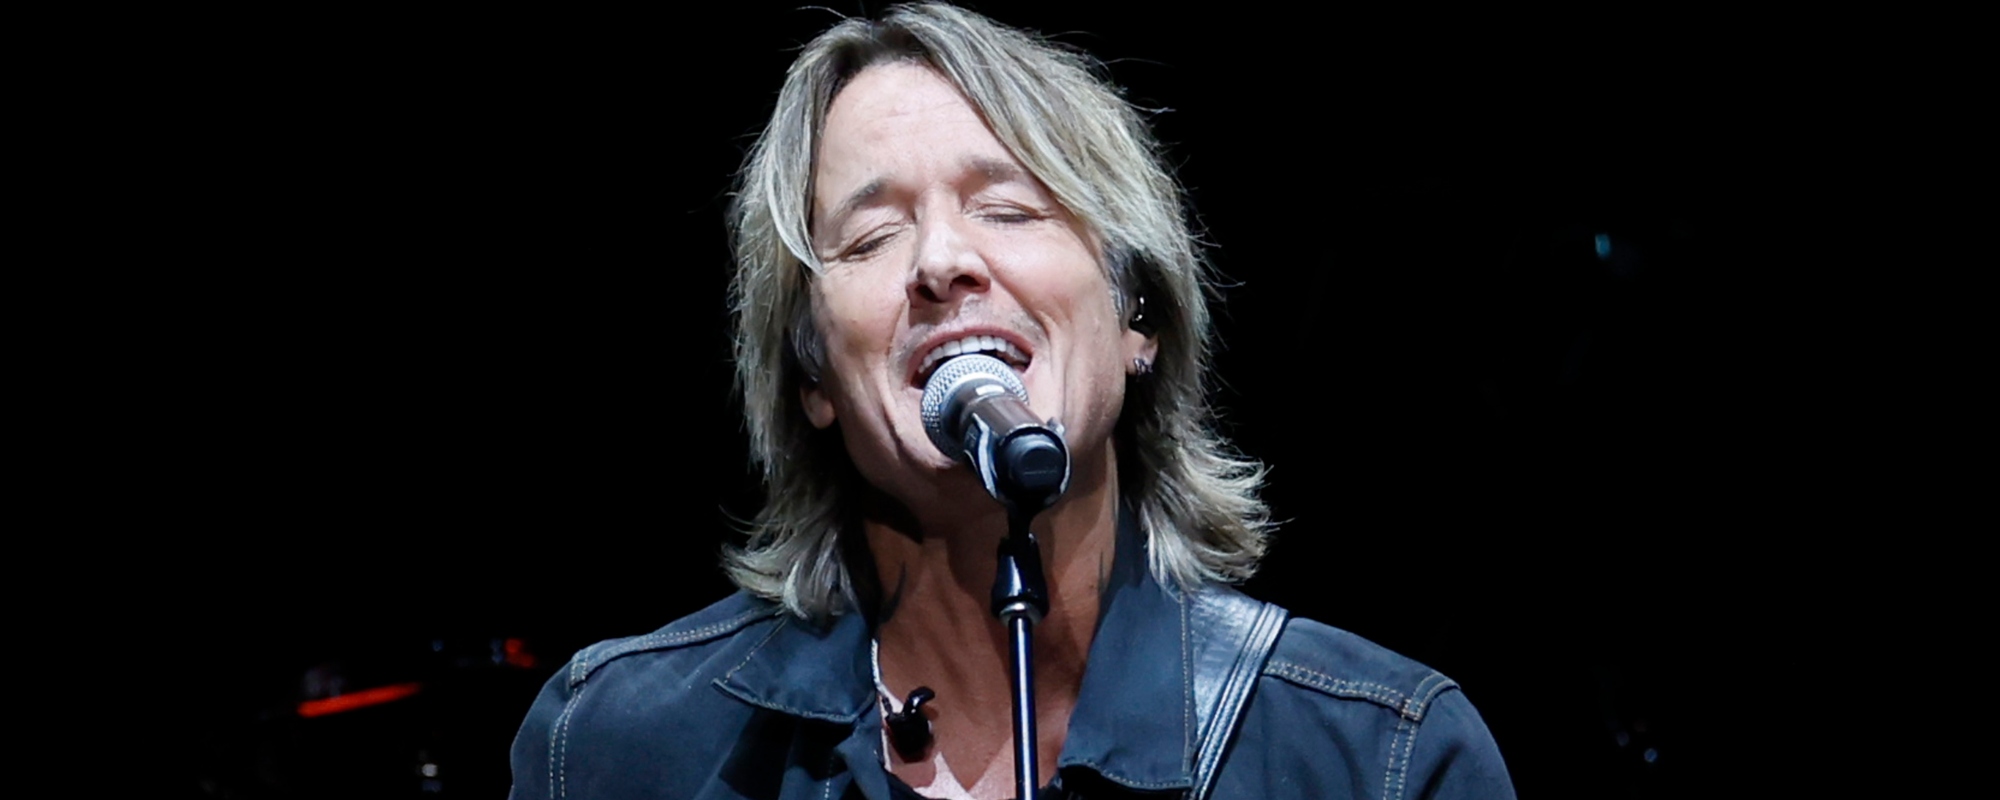 Keith Urban Shares Major Update on New Project Following Cryptic Post, Announces Single Debut